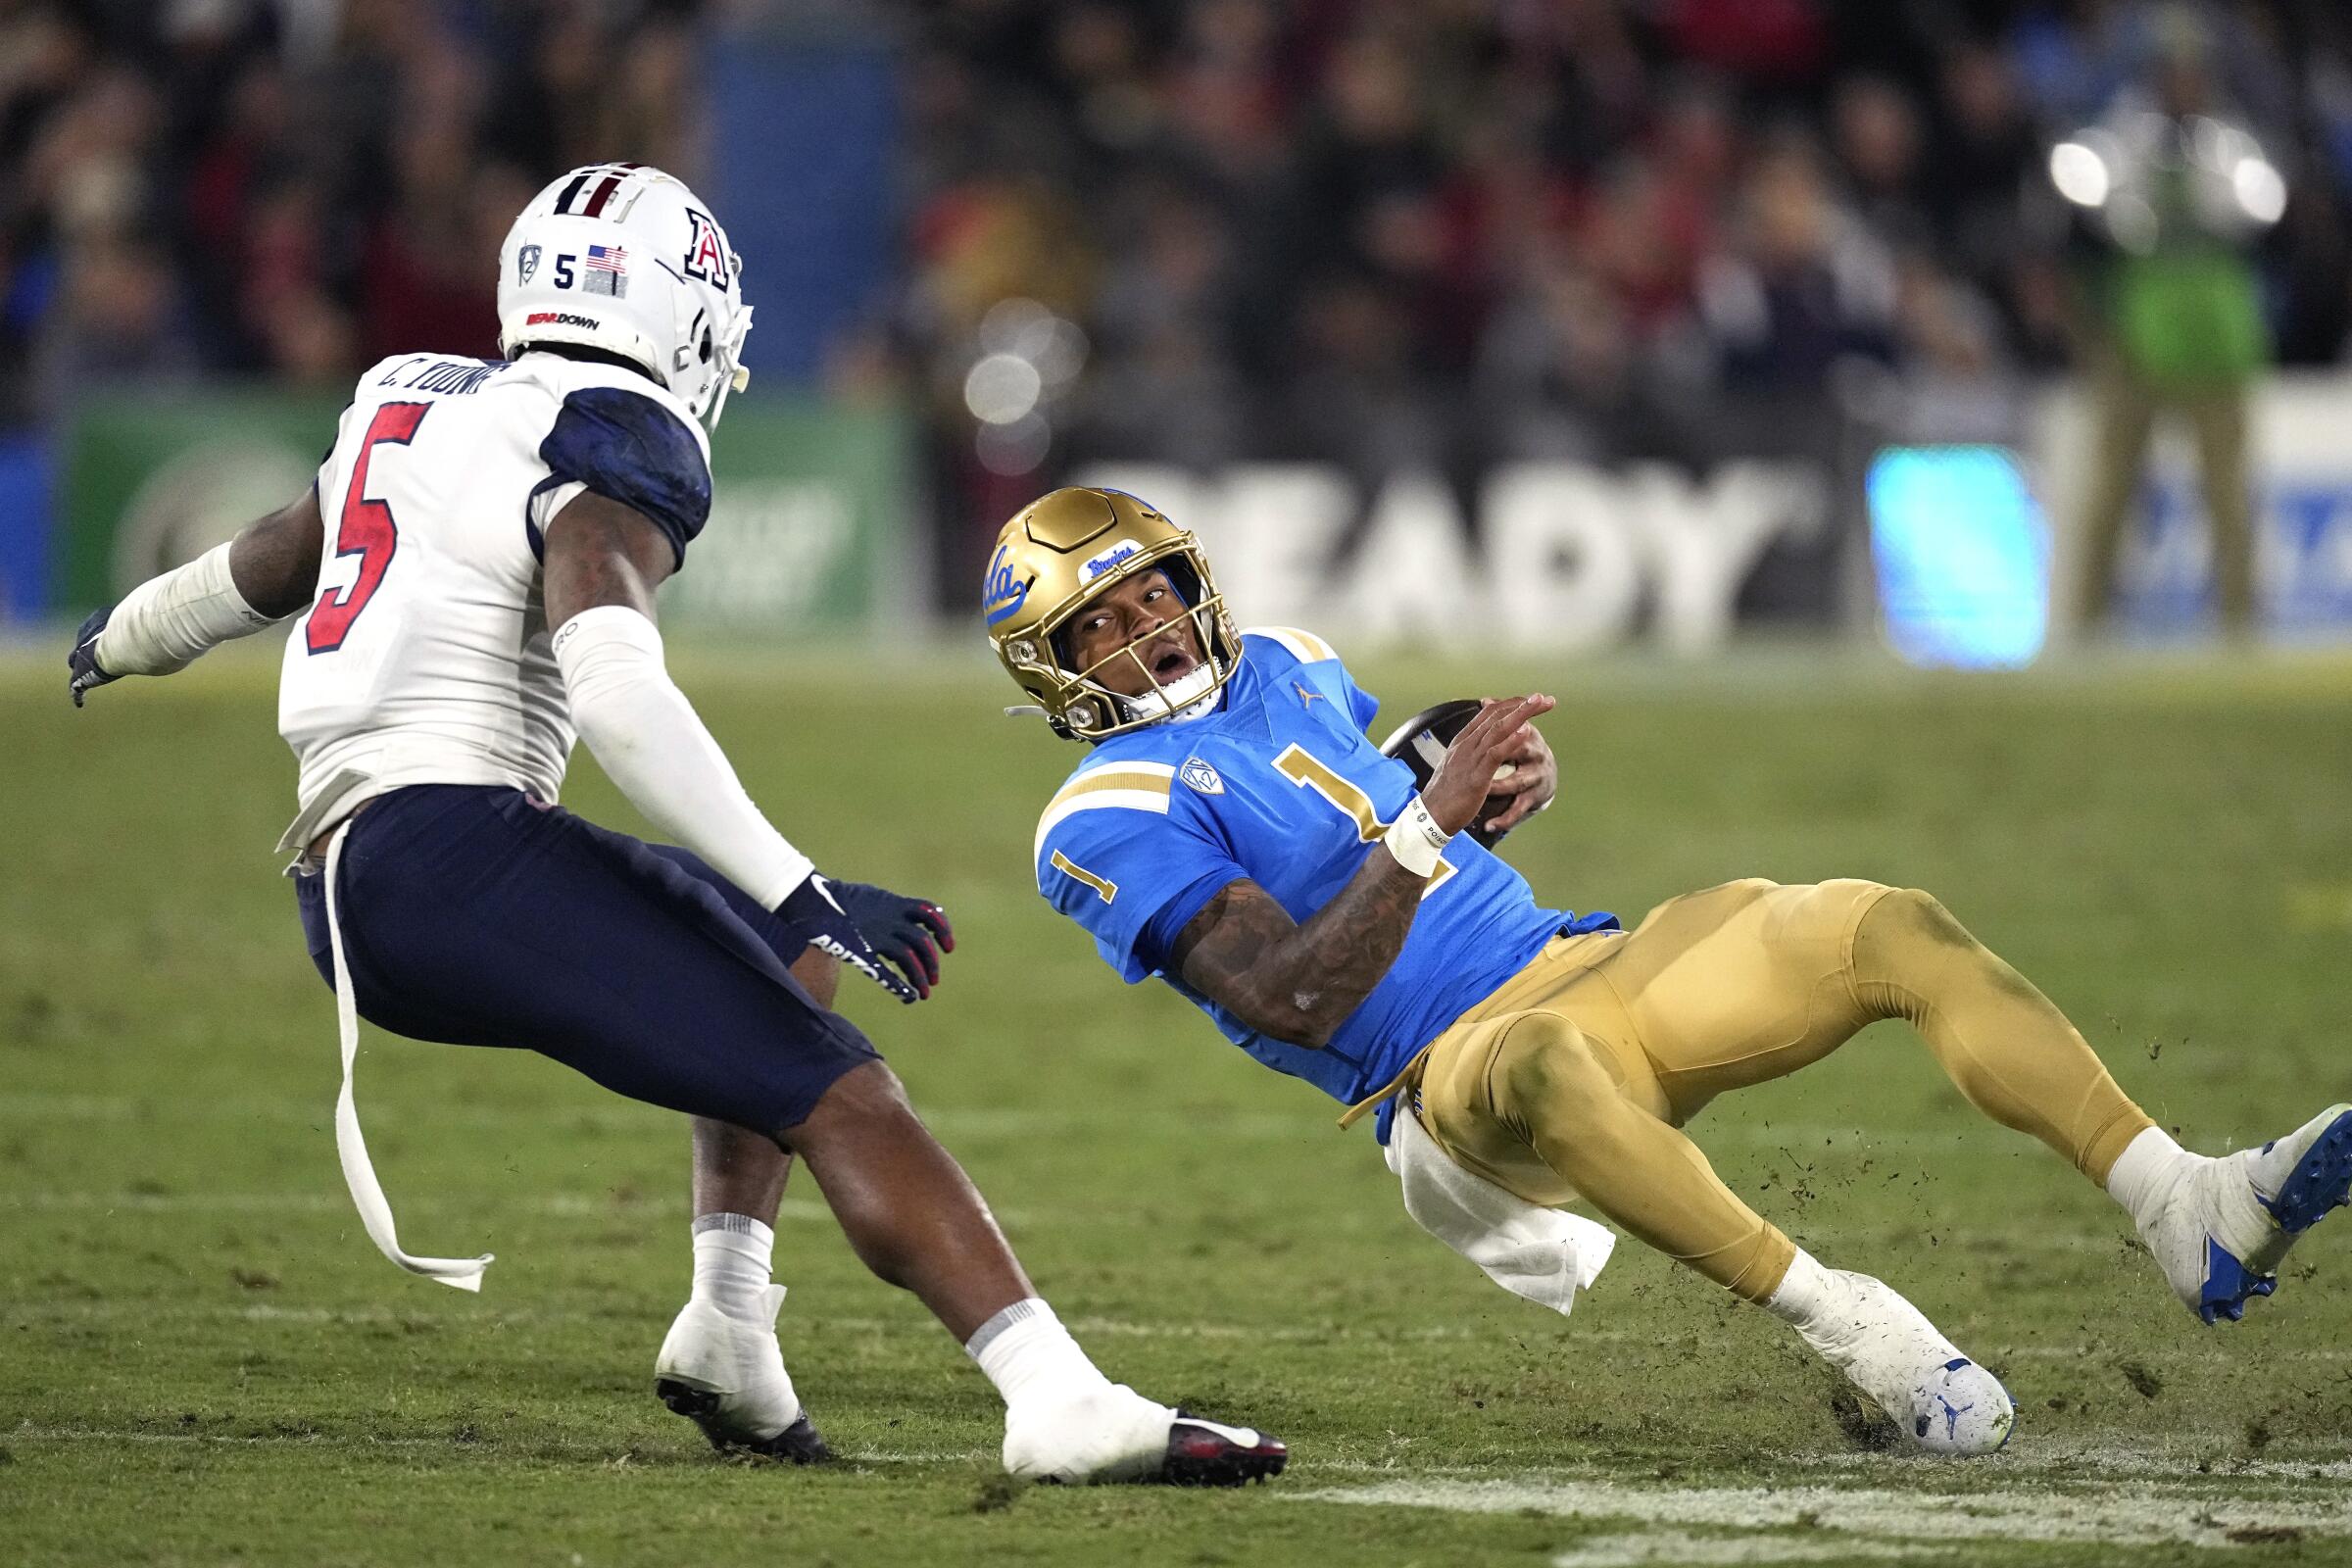 UCLA quarterback Dorian Thompson-Robinson, right, slips while under pressure from Arizona safety Christian Young.